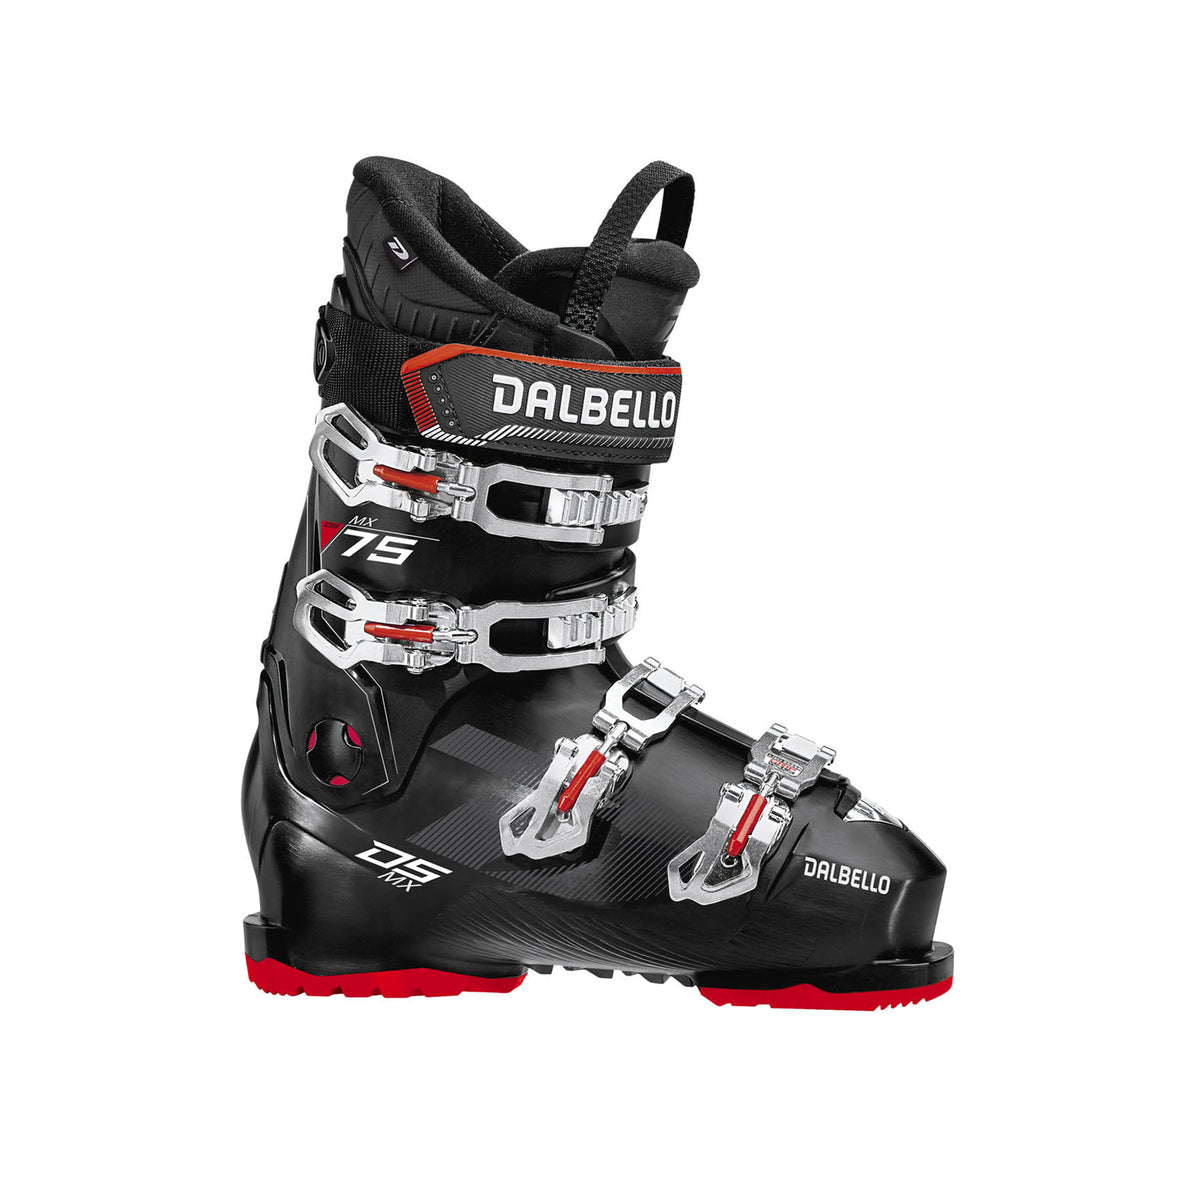 Hero image of the MX 77 Ski boot in black and red.